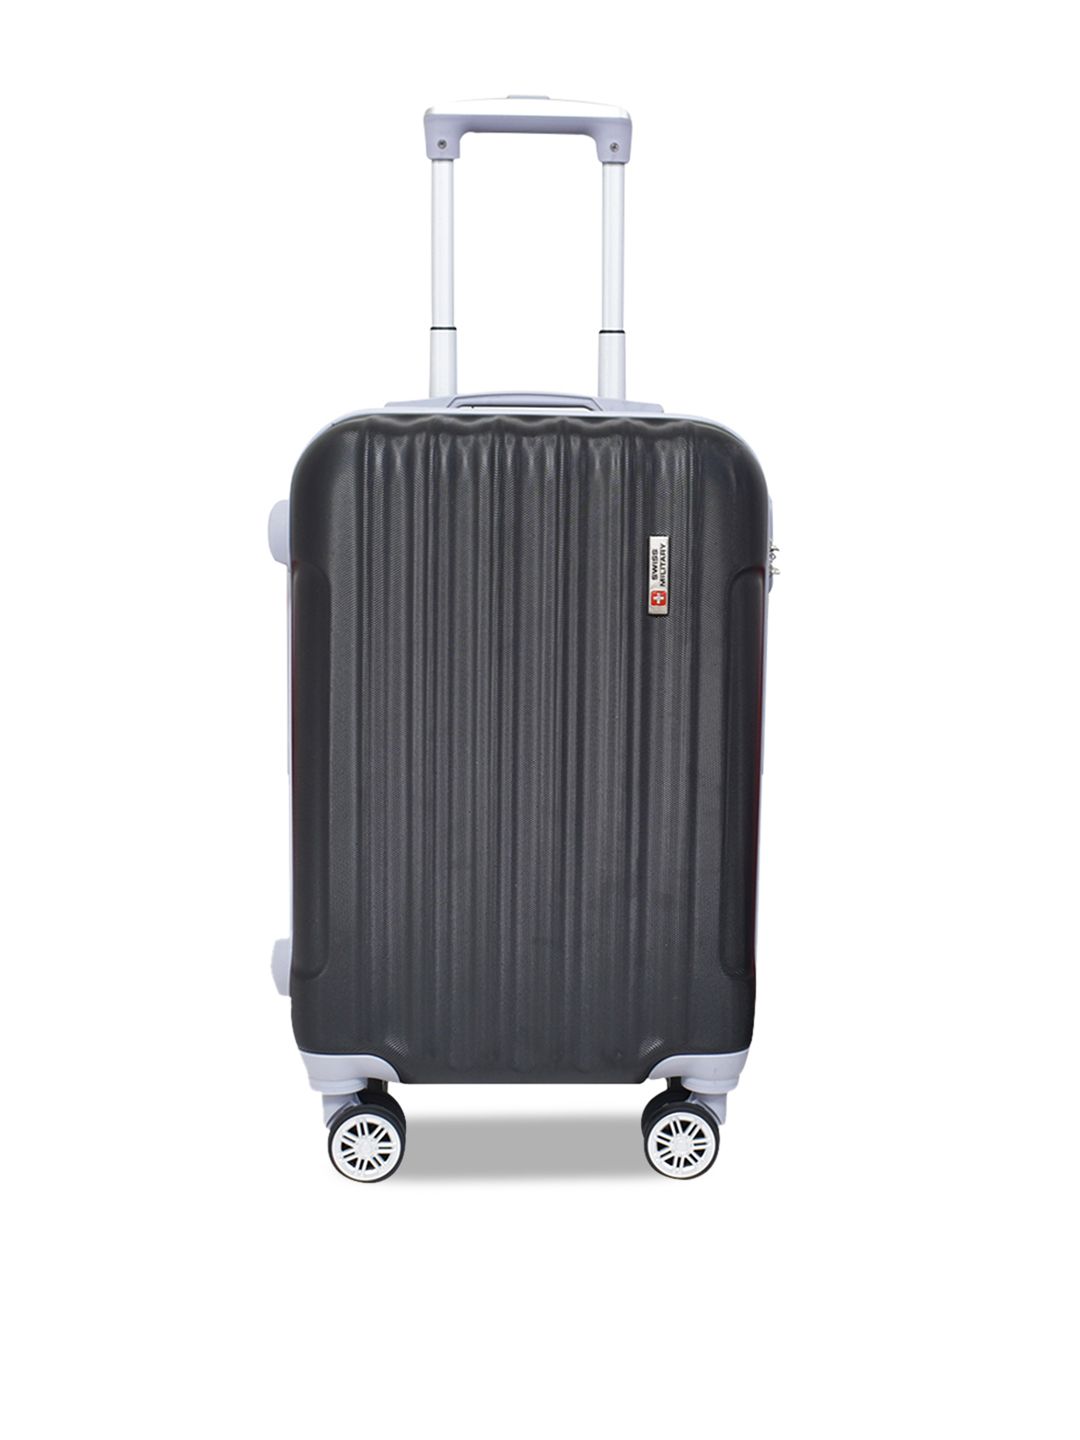 SWISS MILITARY Black Textured Hard-Sided Cabin Trolley Suitcase Price in India